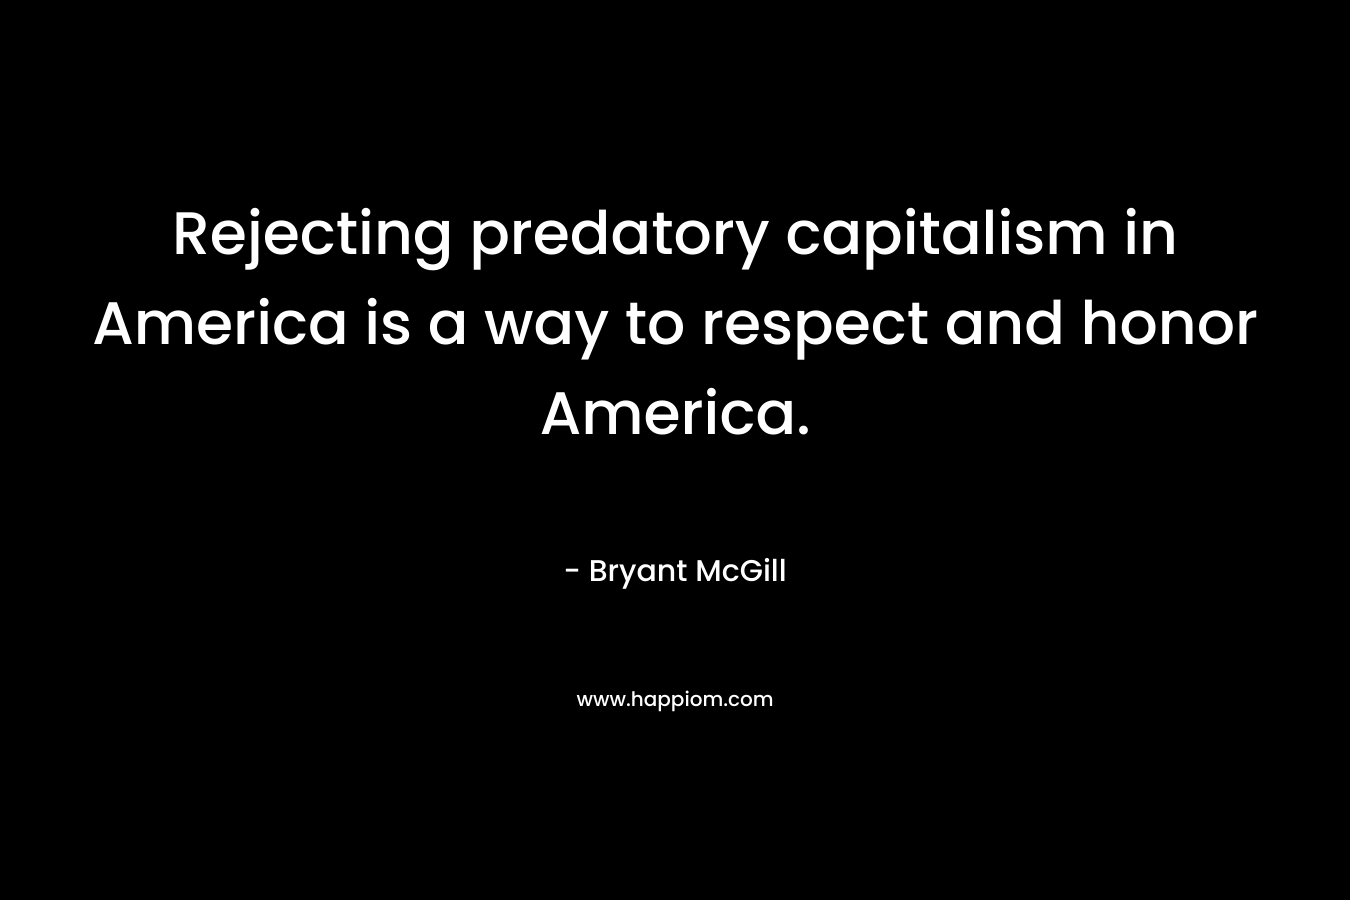 Rejecting predatory capitalism in America is a way to respect and honor America.